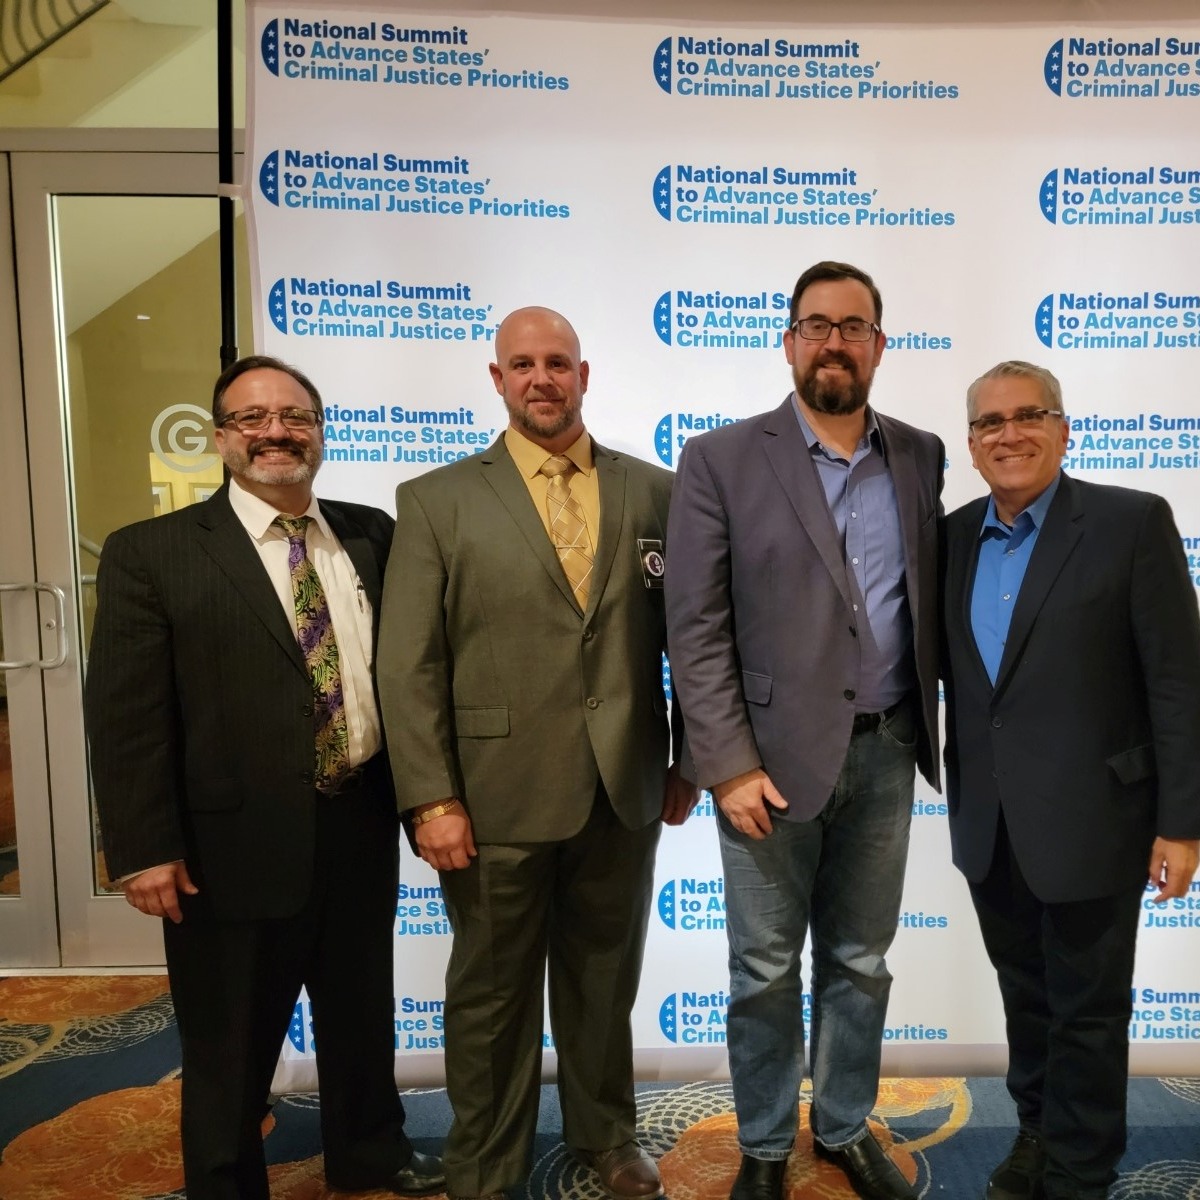 Last week, I had the honor of attending and speaking at the National Summit to Advance States' Criminal Justice Policies about @KathyFndzRundle's Smart Justice Programs. Great meeting! @Director_BJA @CSGovts @PewStates @Arnold_Ventures @CJIatCRJ @miamidefender1 @Volzie